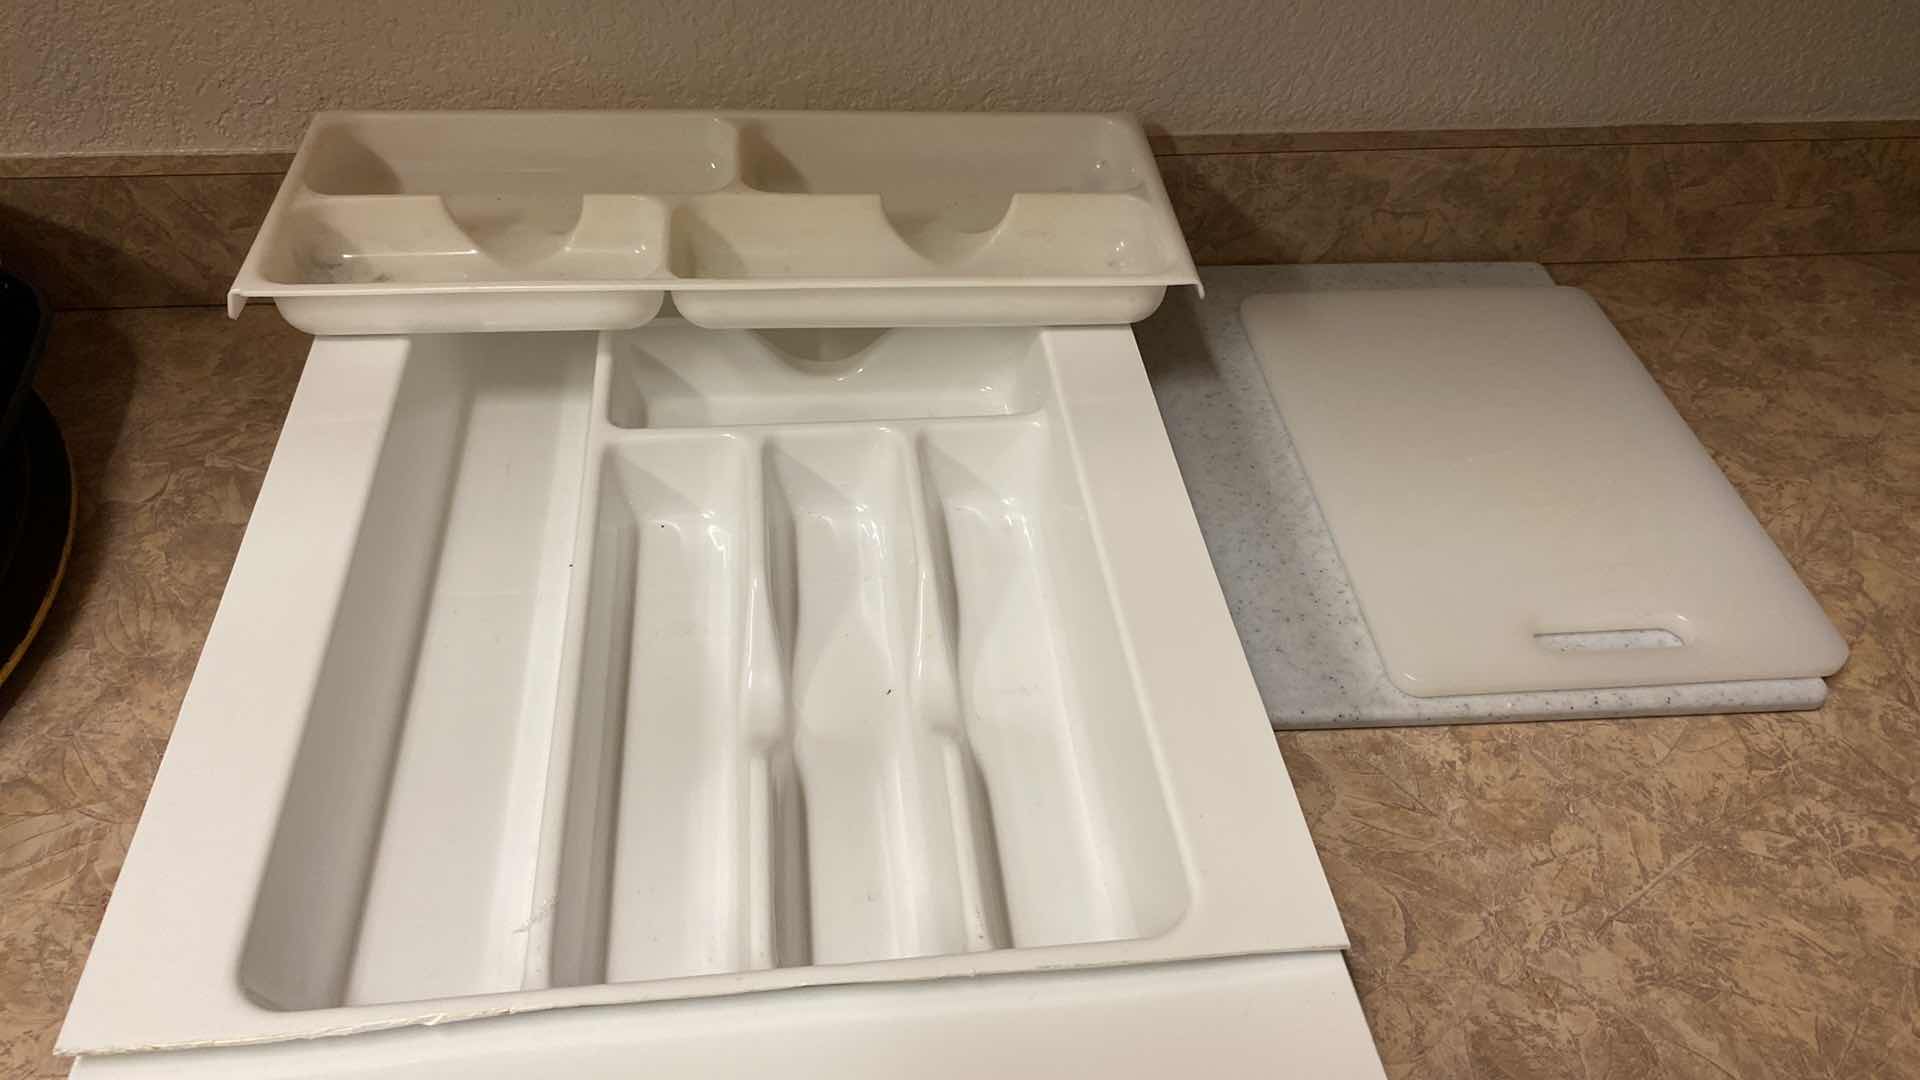 Photo 1 of SILVERWARE ORGANIZERS AND PAIR OF CUTTING BOARDS